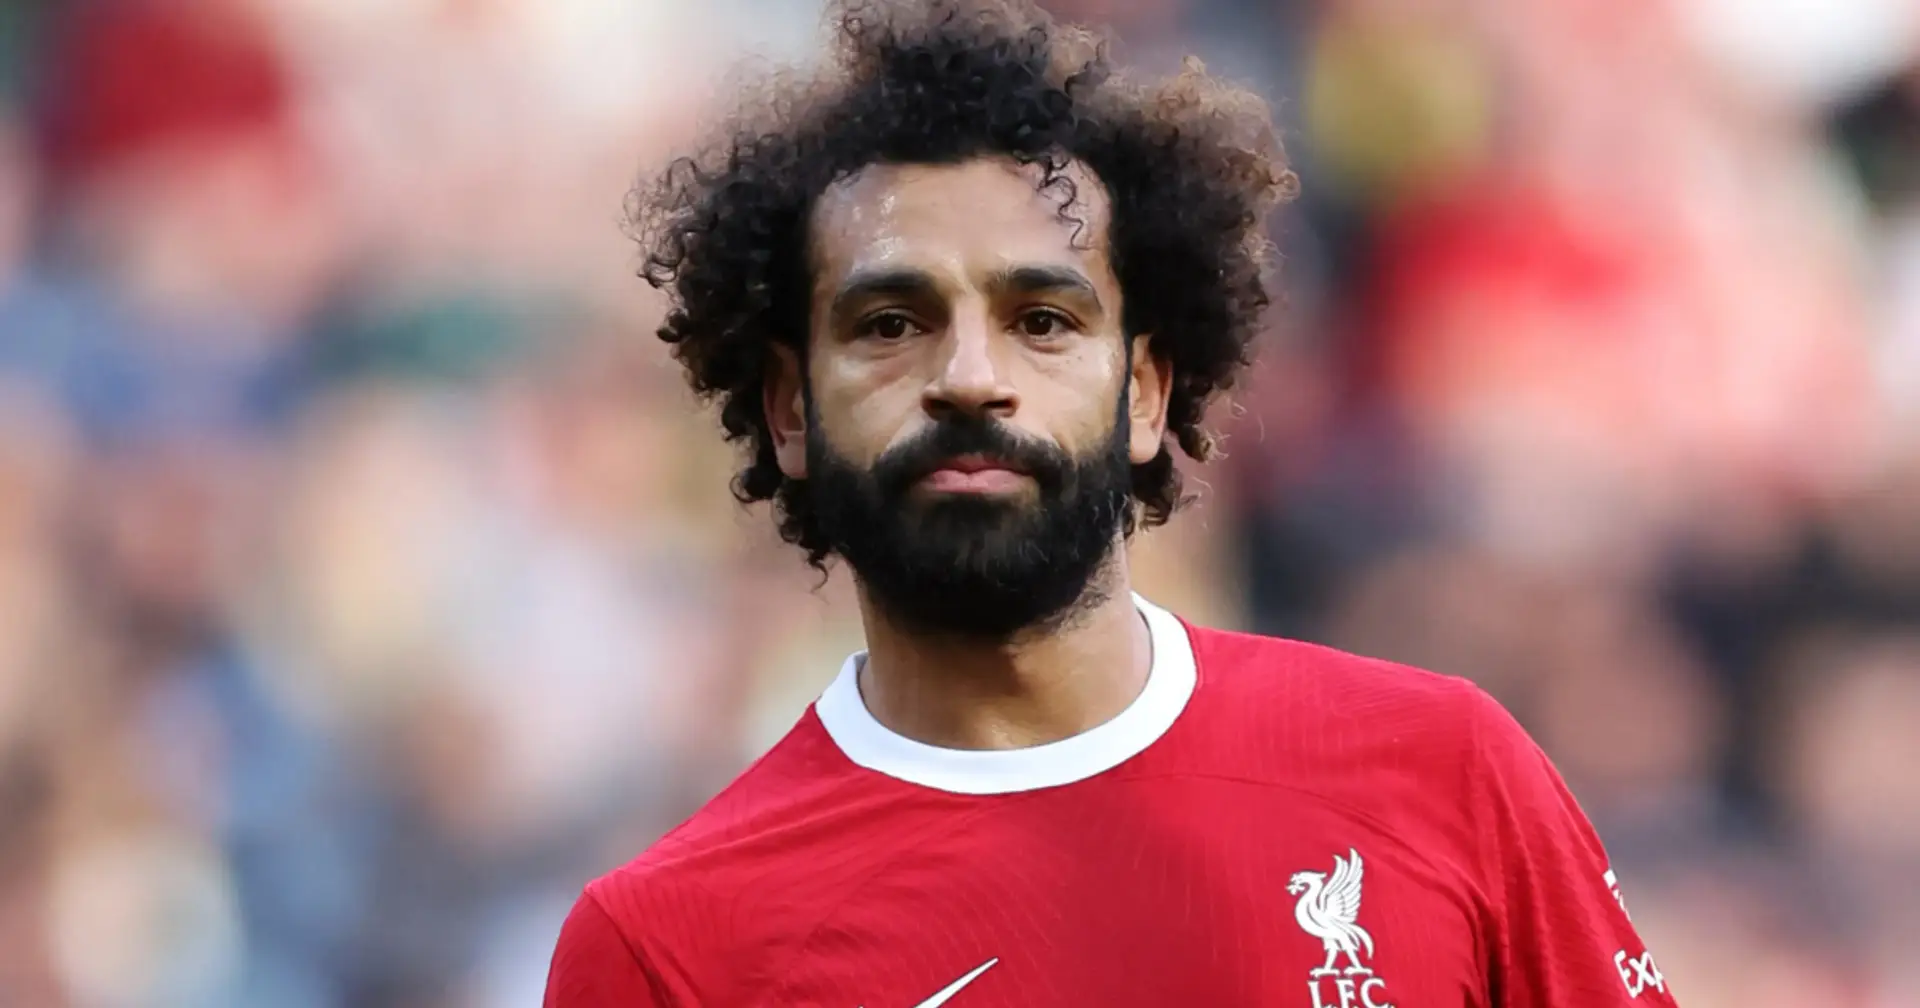 'Injury worse than first feared': Liverpool issue Salah statement